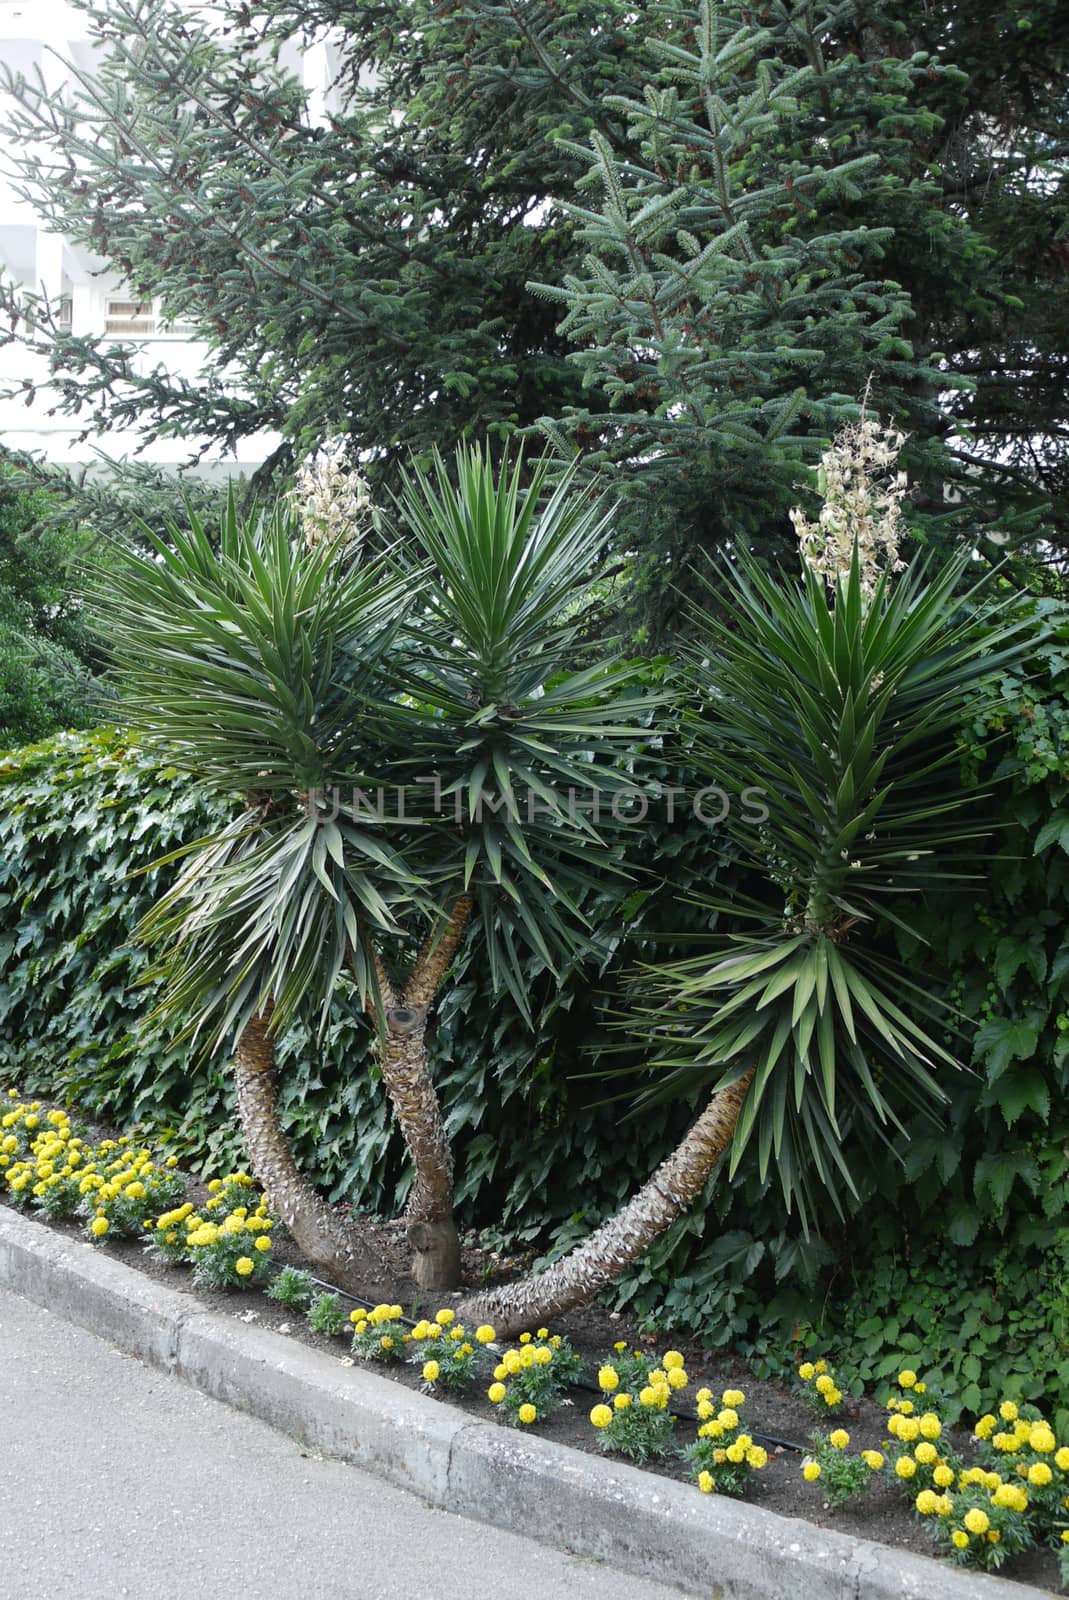 A small decorative palm tree in the background of green plantations